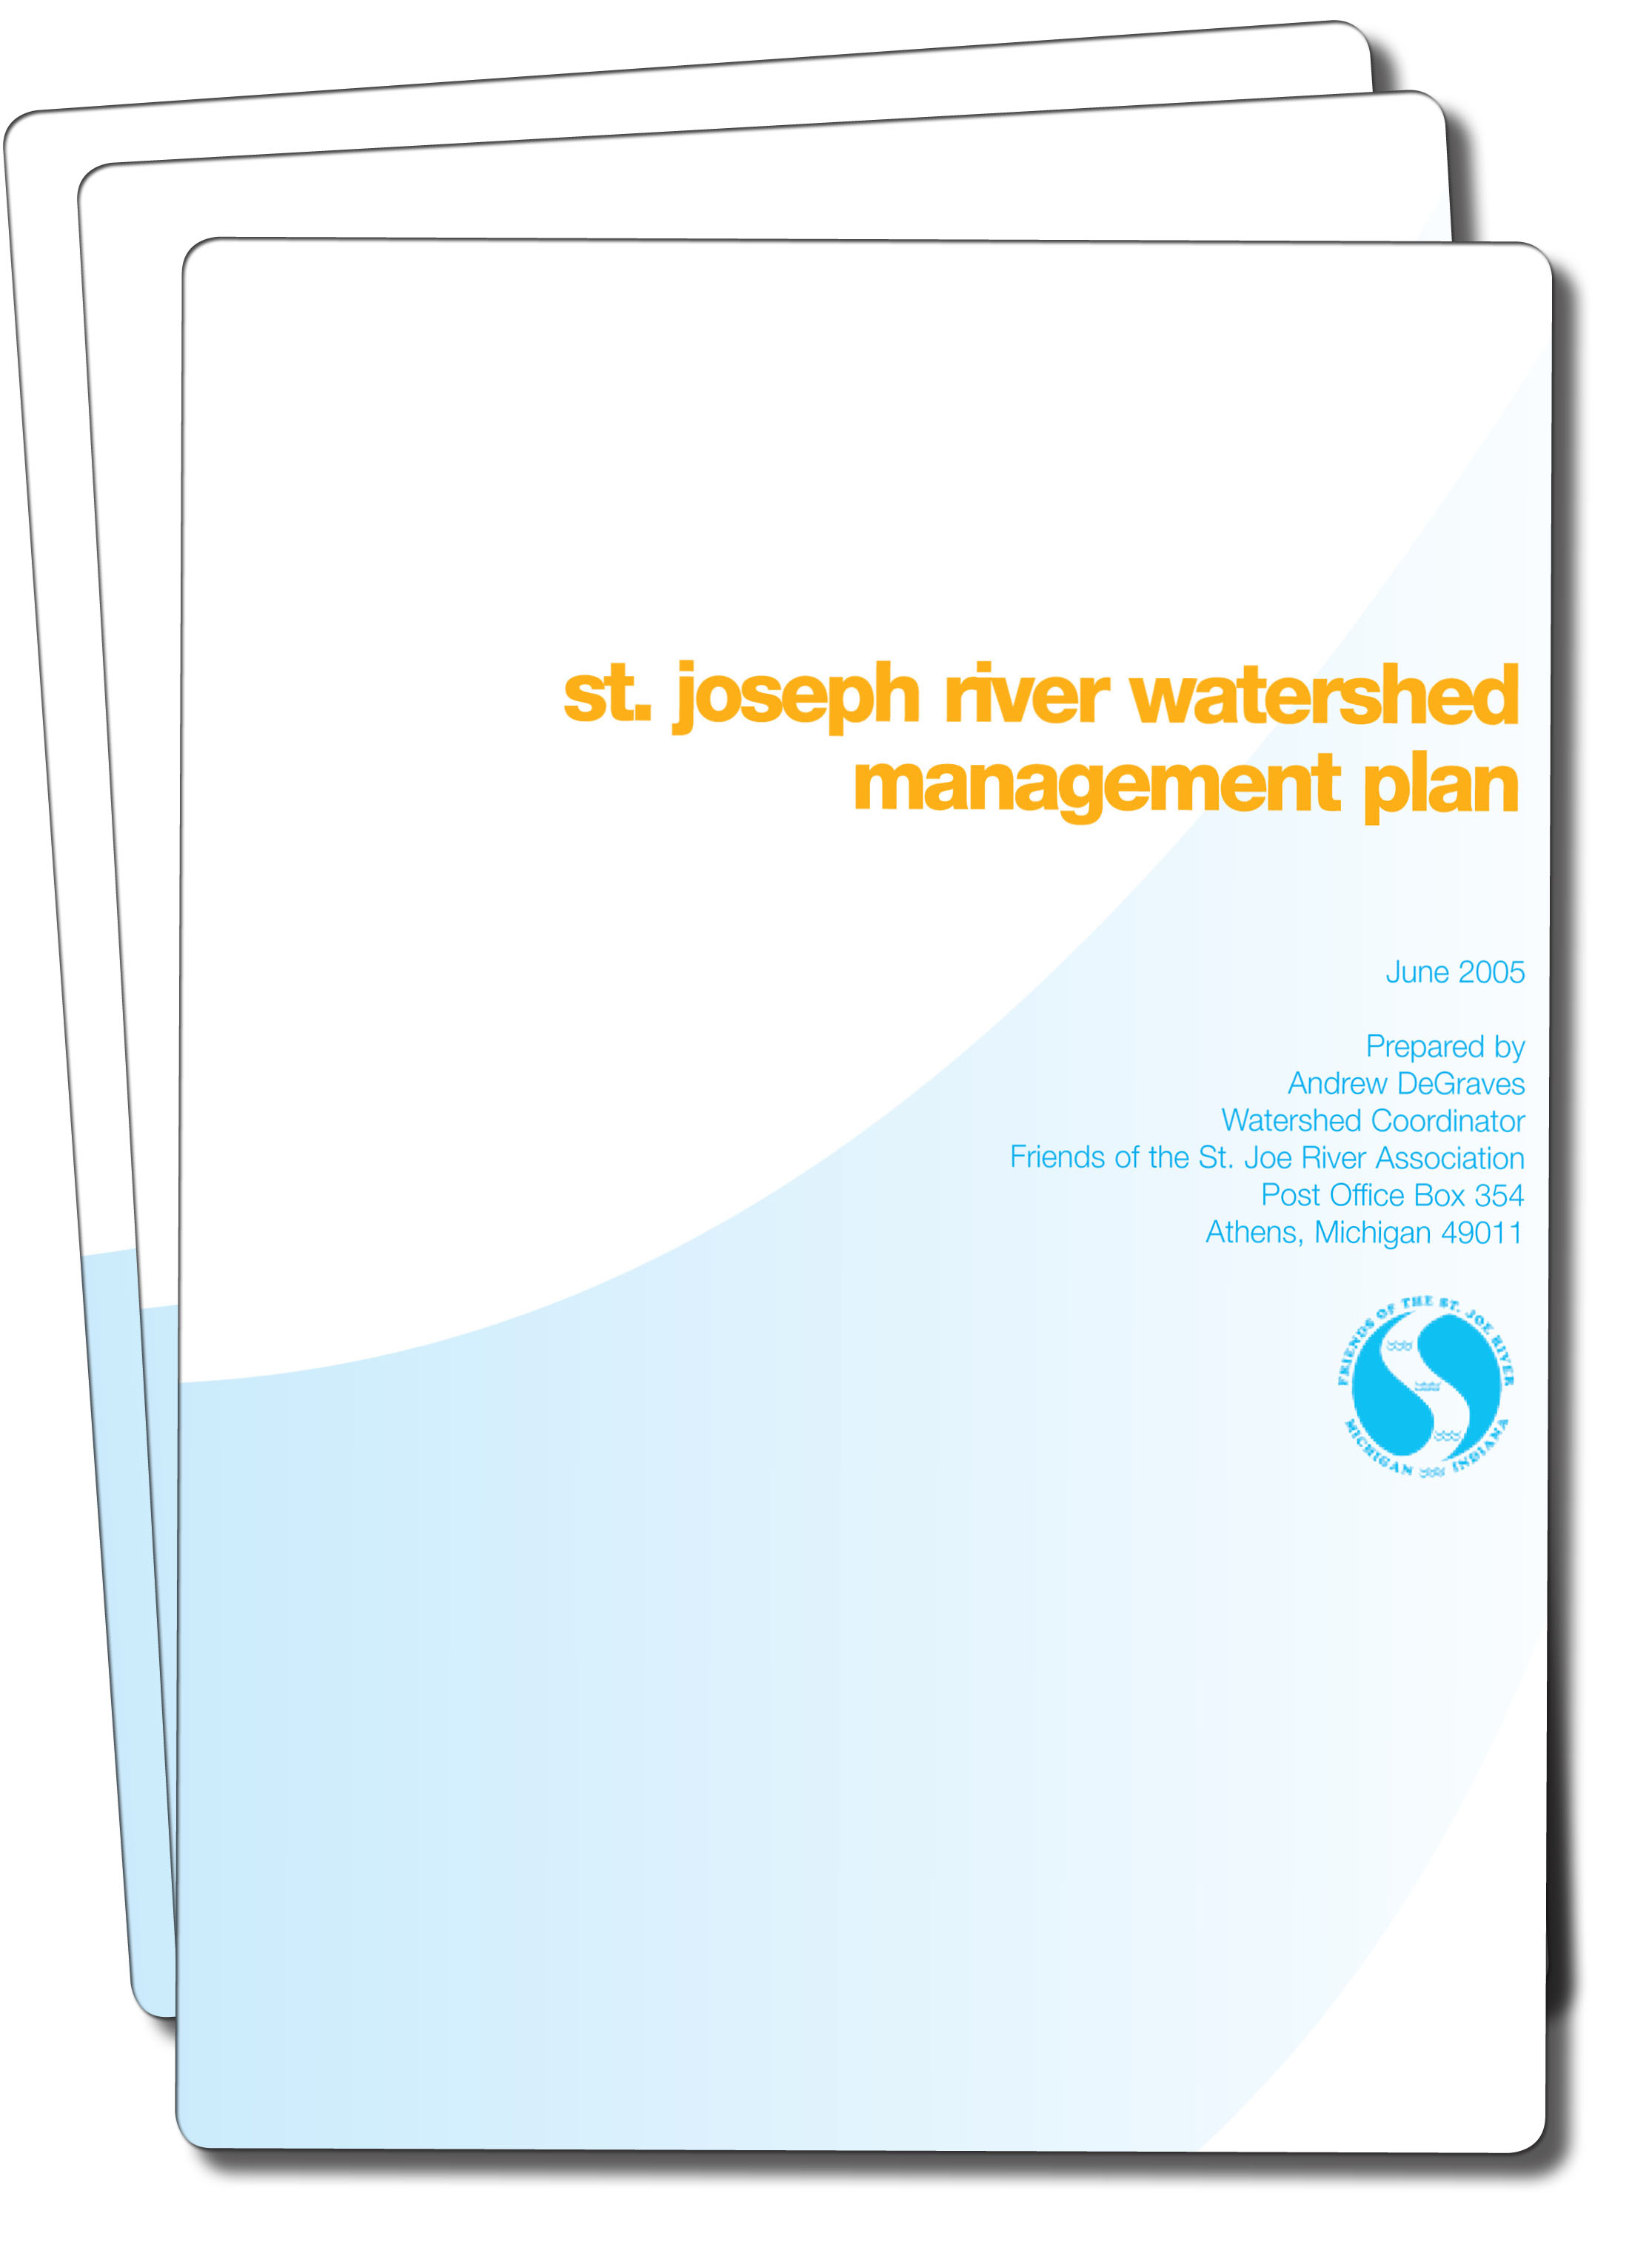 View the St. Joseph River Watershed Management Plan